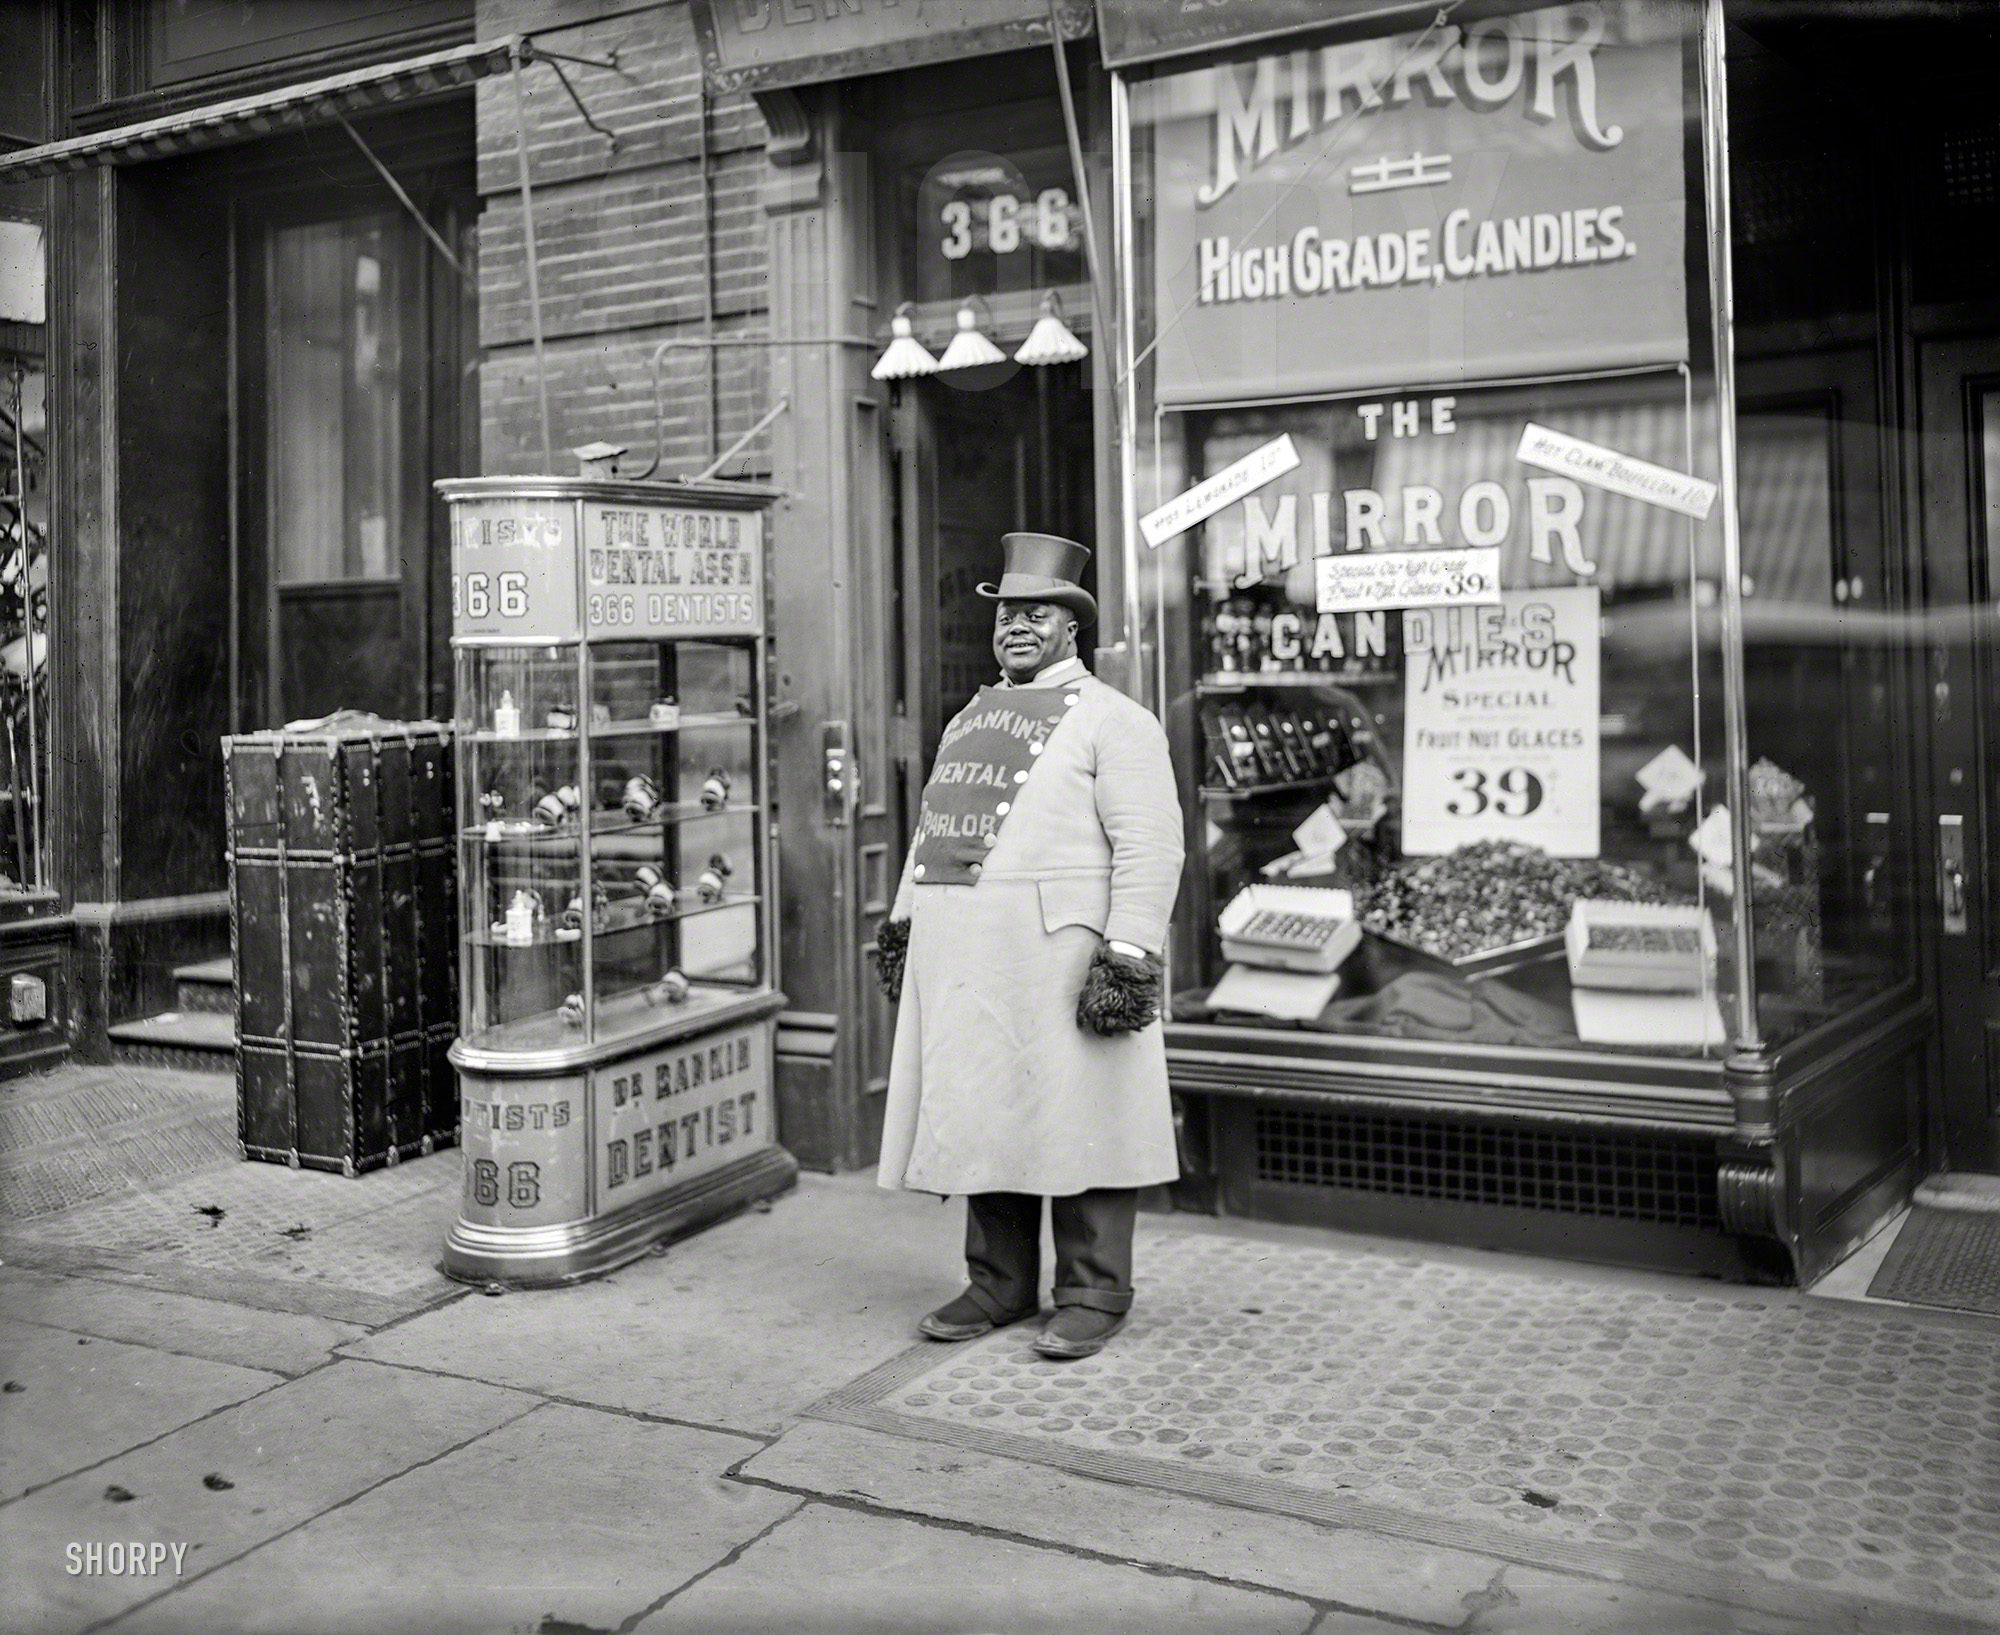 Circa 1905. "A living sign on Fifth Avenue, New York City." Brand ambassador for Dr. Rankin's Dental Parlor, conveniently close to a candy store. View full size.